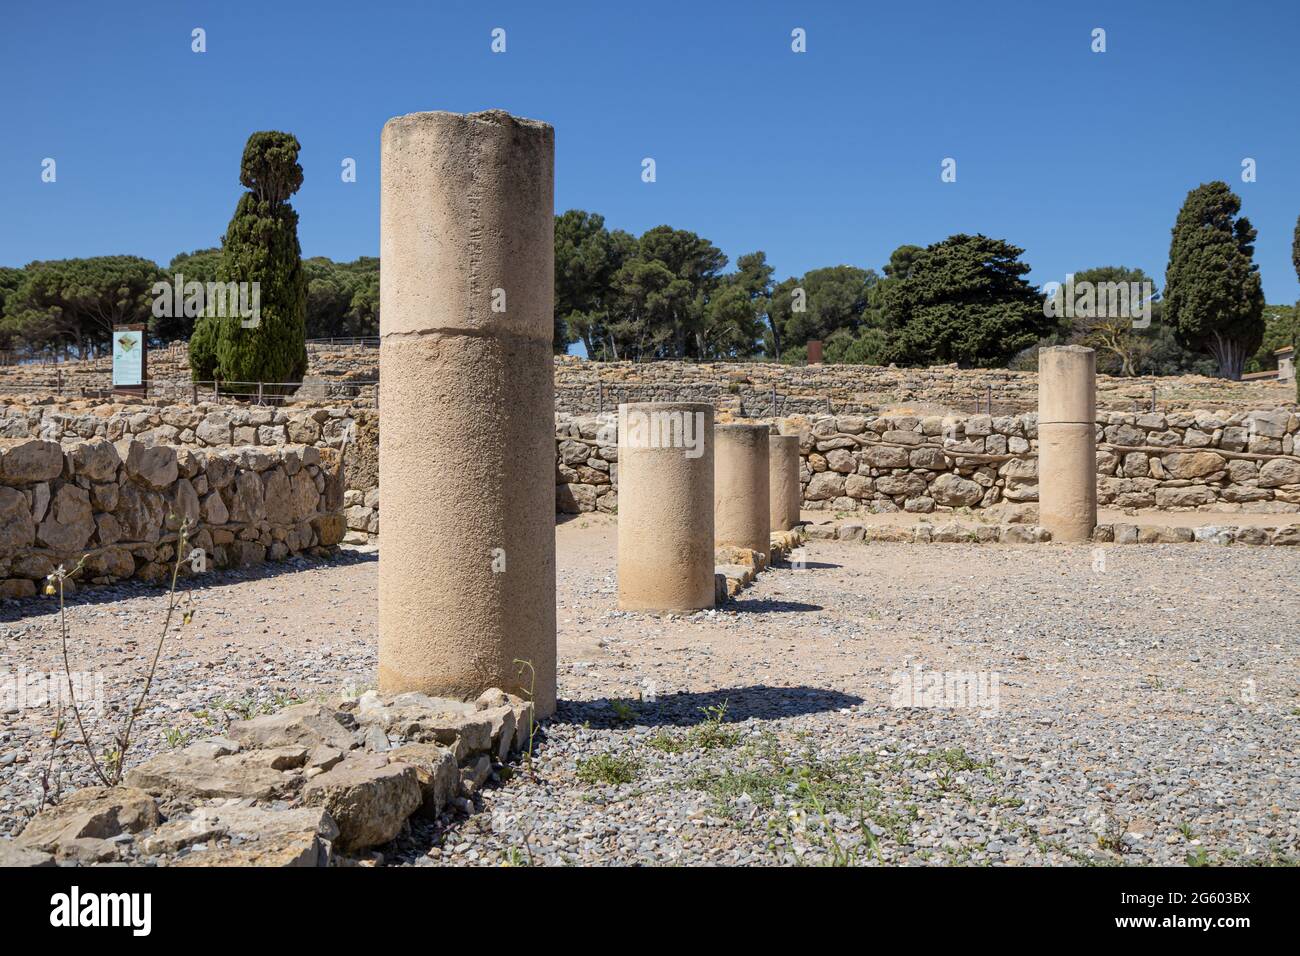 Archaeological Remains of ancient city Empuries. Remains of a Greek rampart. Archaeology Museum of Catalonia, Spain. Stock Photo